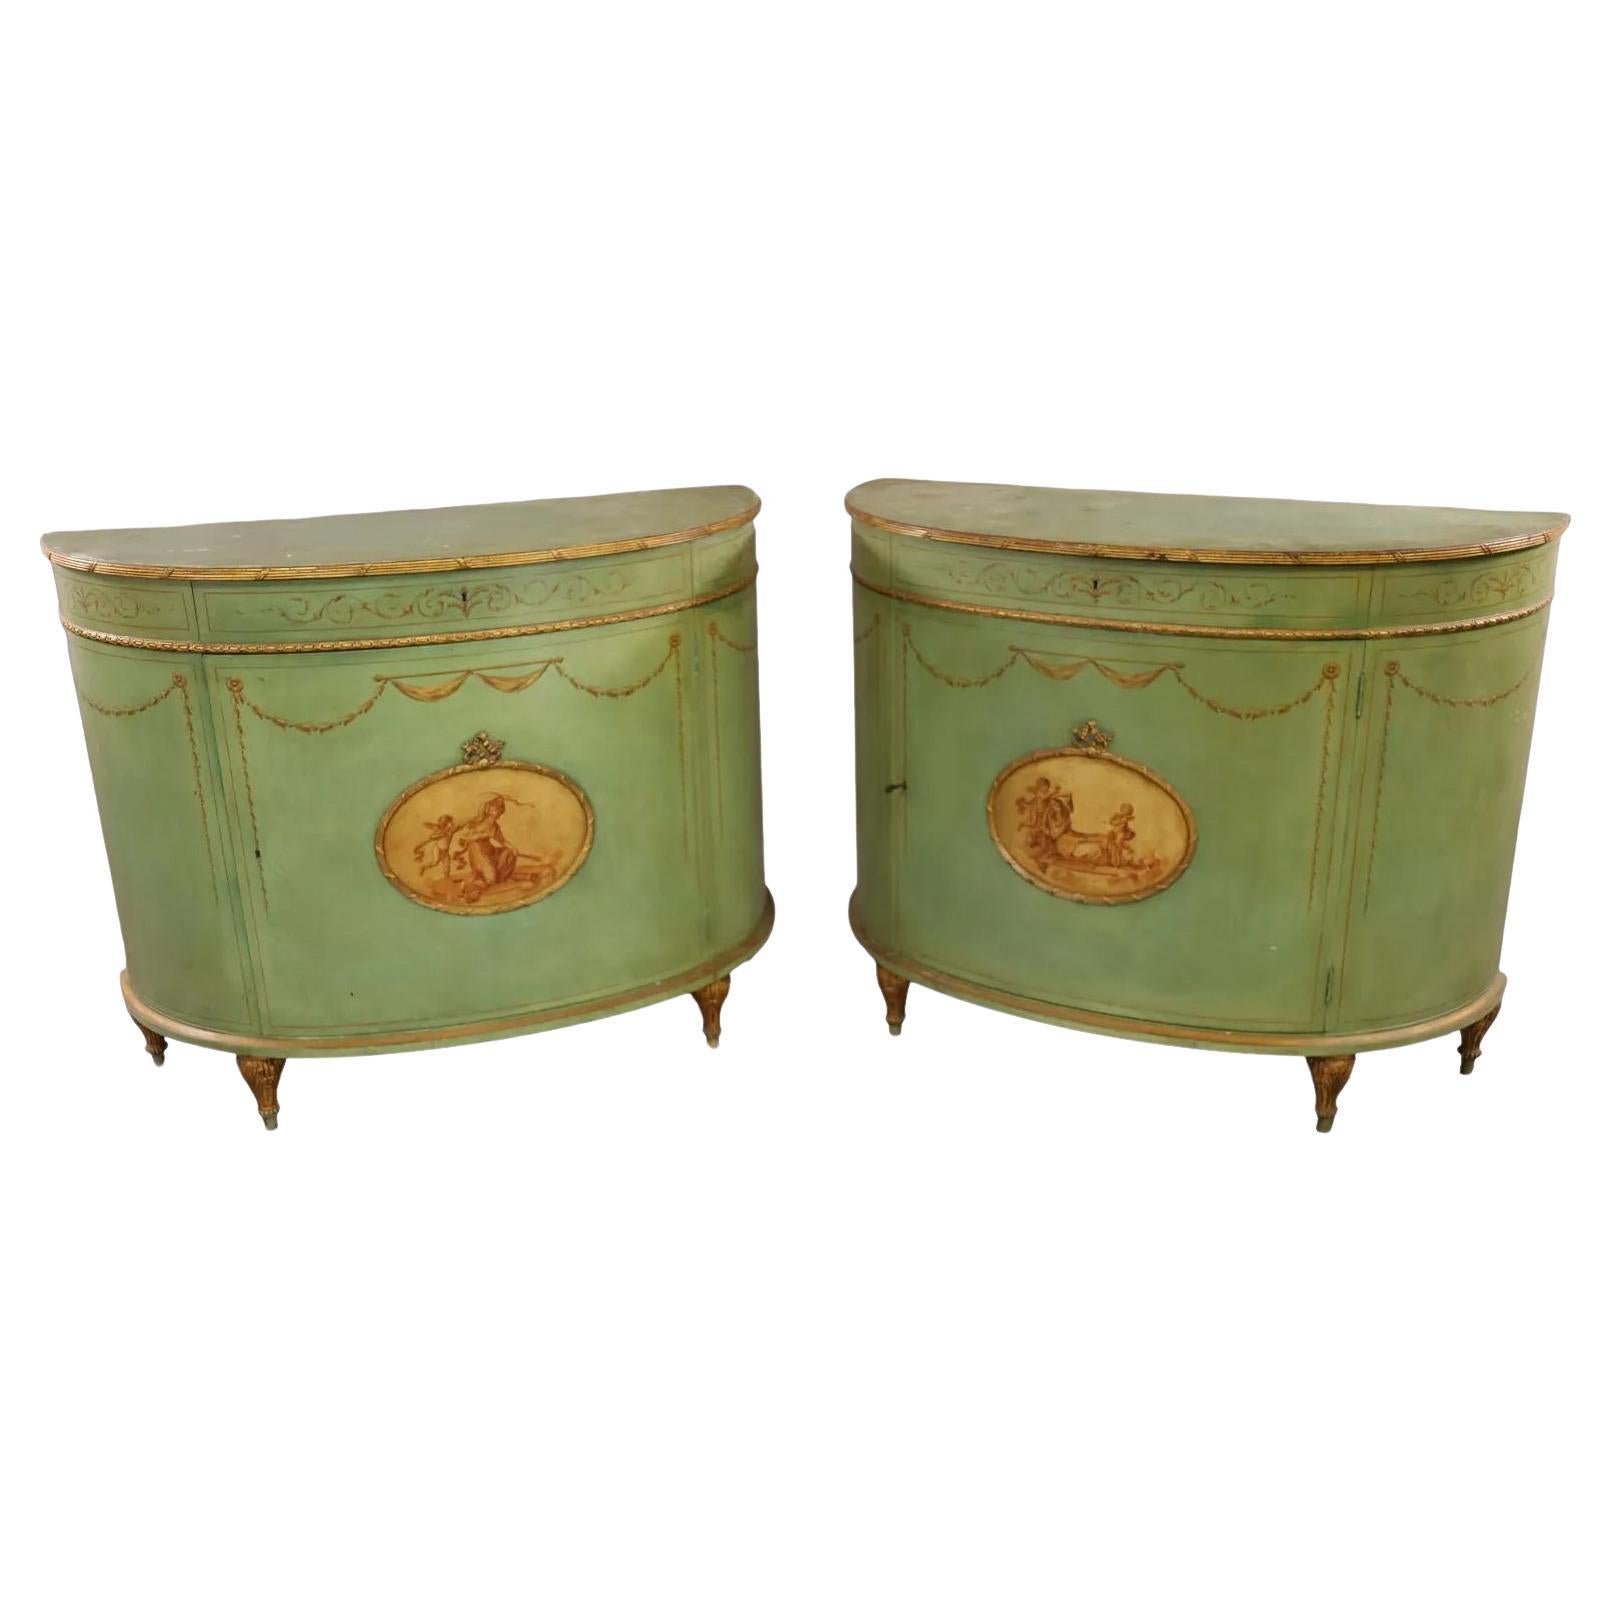 Late 19thc Pair of Italian Hand Painted Green Commodes